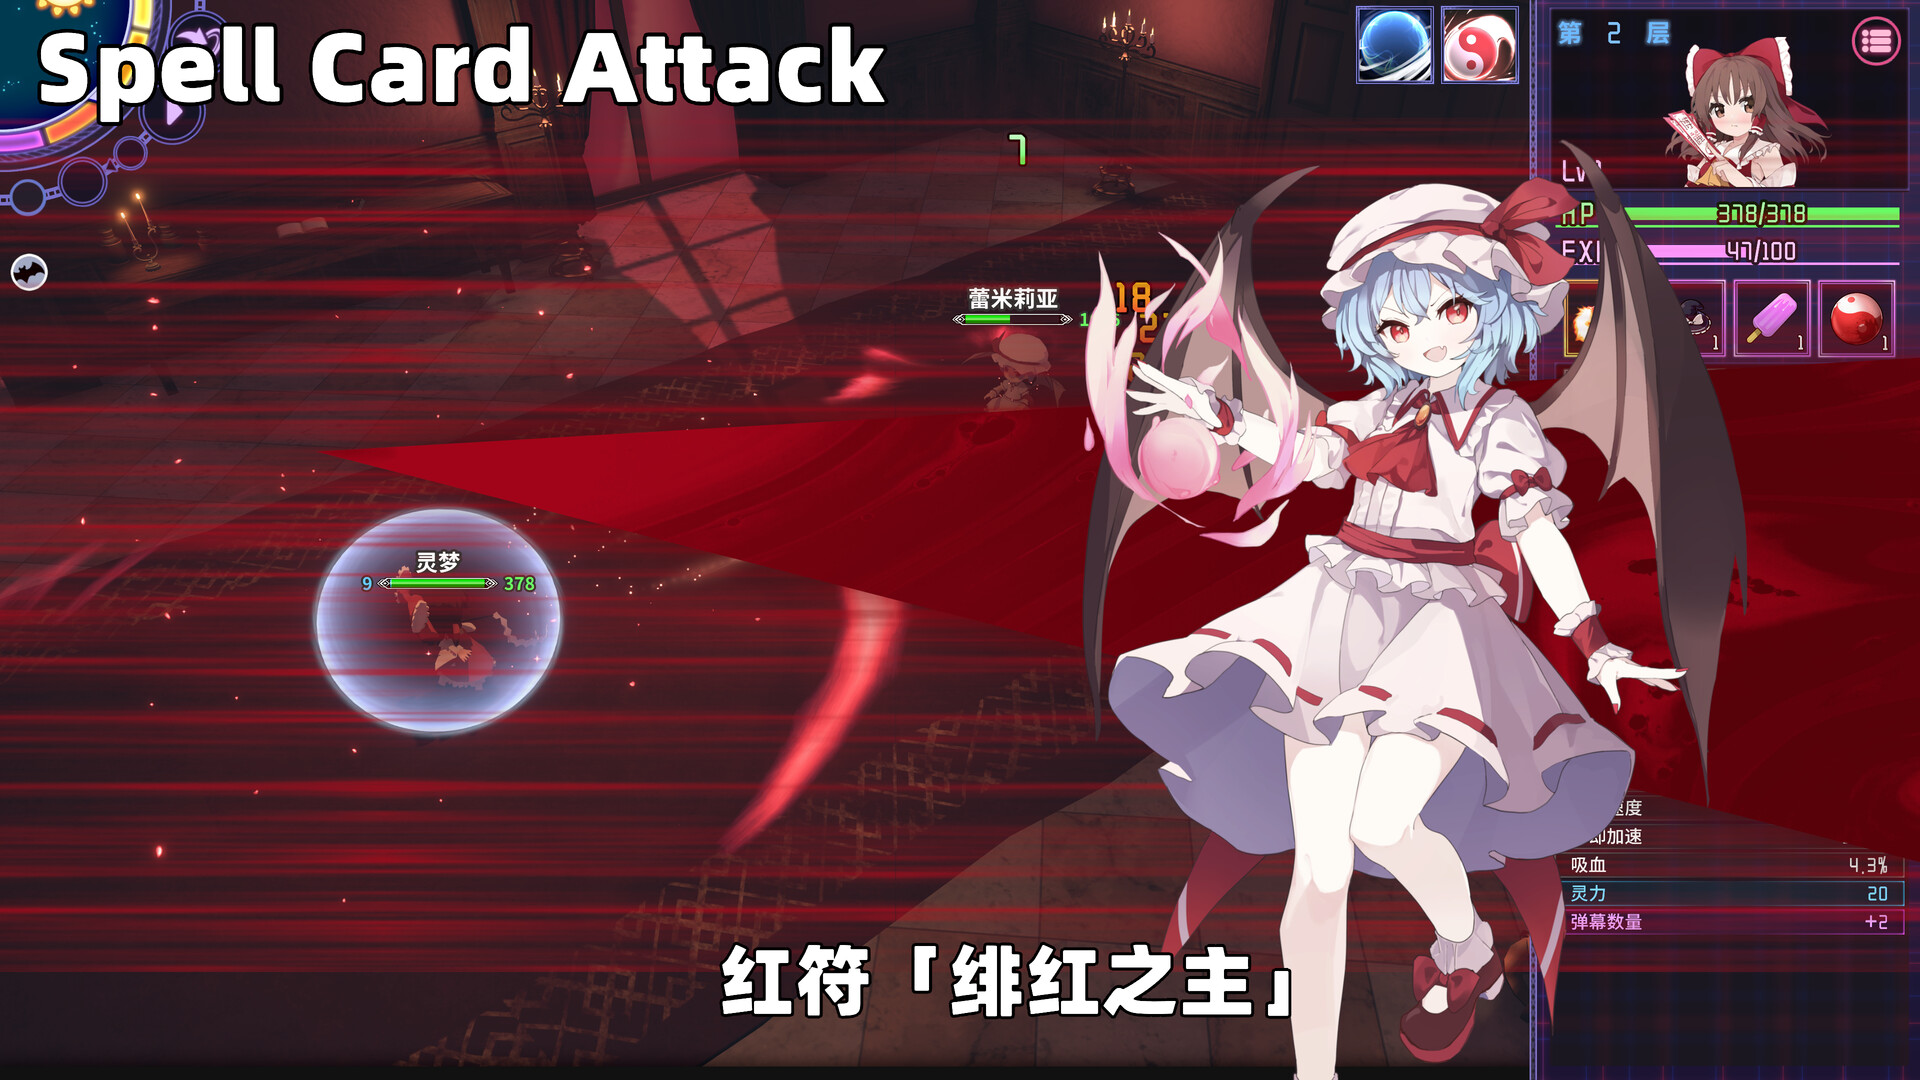 Touhou: Dreamland of Infinity Free Download